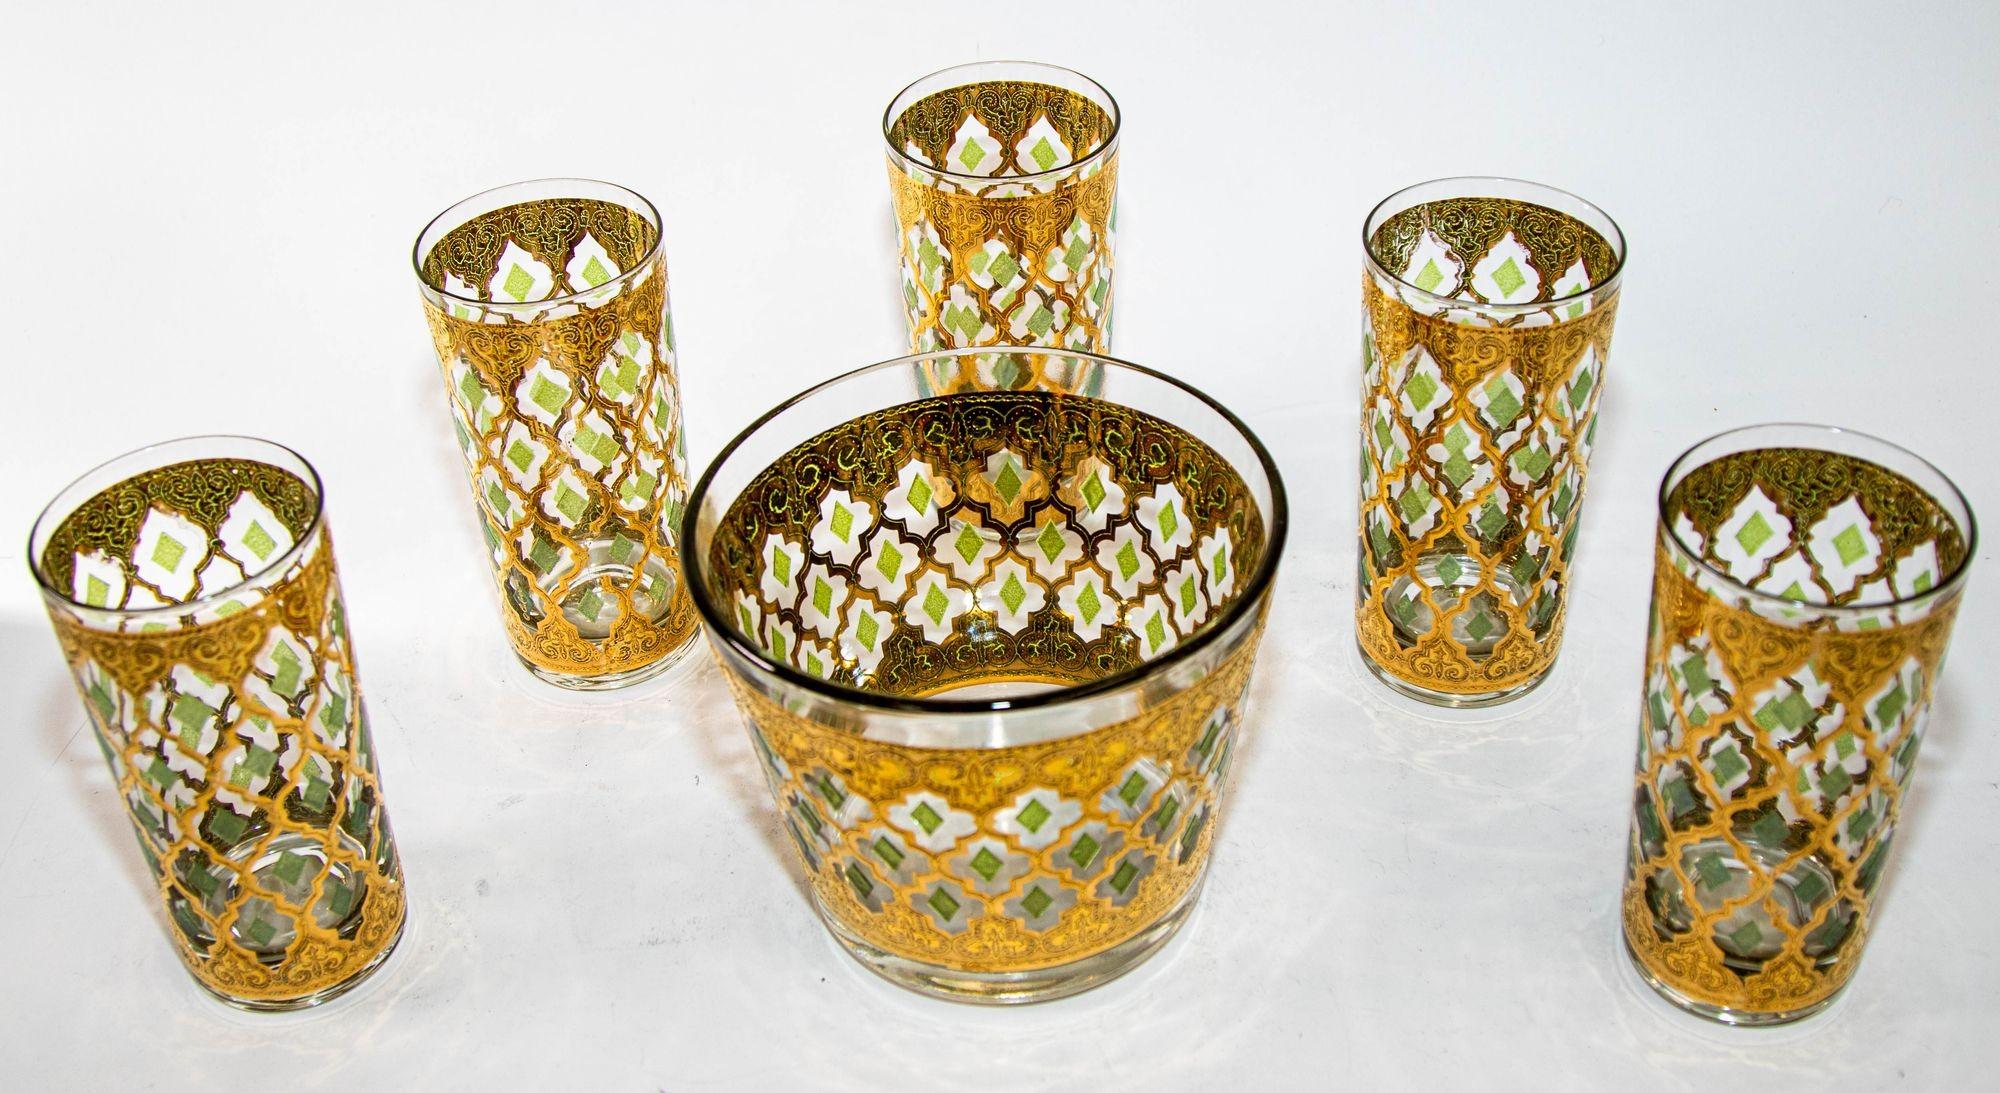 1960s Set of Five Vintage Culver Ltd Highball Glasses and Ice Bucket with 22-Karat Gold Valencia Design.
Elegant vintage mid-century Culver Ltd barware with Valencia pattern in a gold leaf finish.
Set includes 5 highball tumbler glasses and one ice